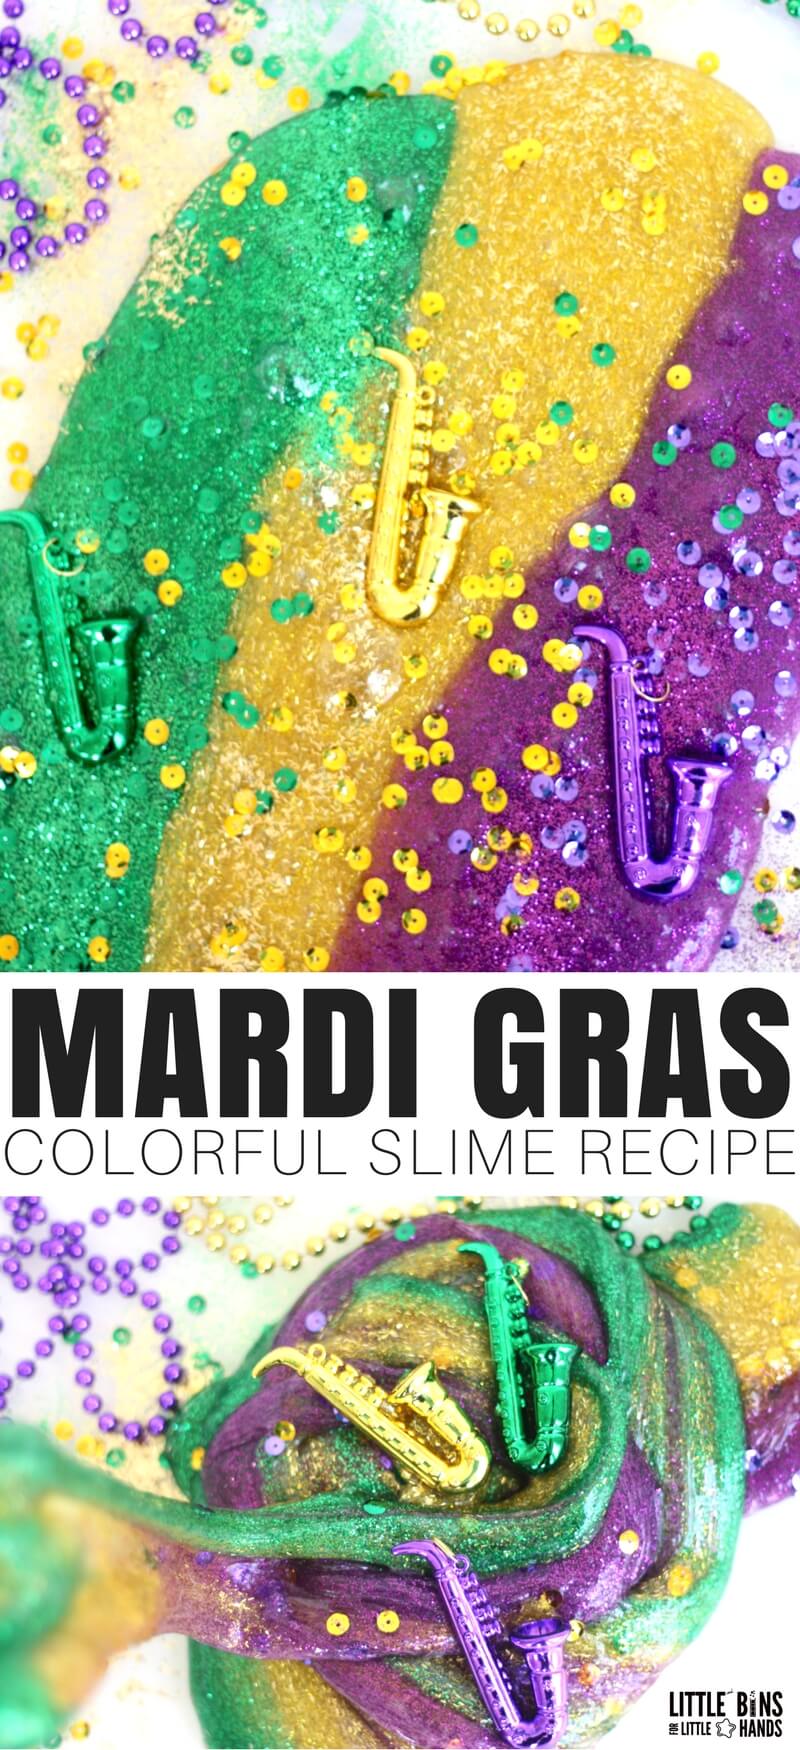 How To Make Mardi Gras Slime Recipe! Learn how to make colorful Mardi Gras slime with our easy to make slime recipes. Homemade slime recipes are a blast when you have the best ones! Making slime is easy and perfect to go with an holiday, season, or special occasion.